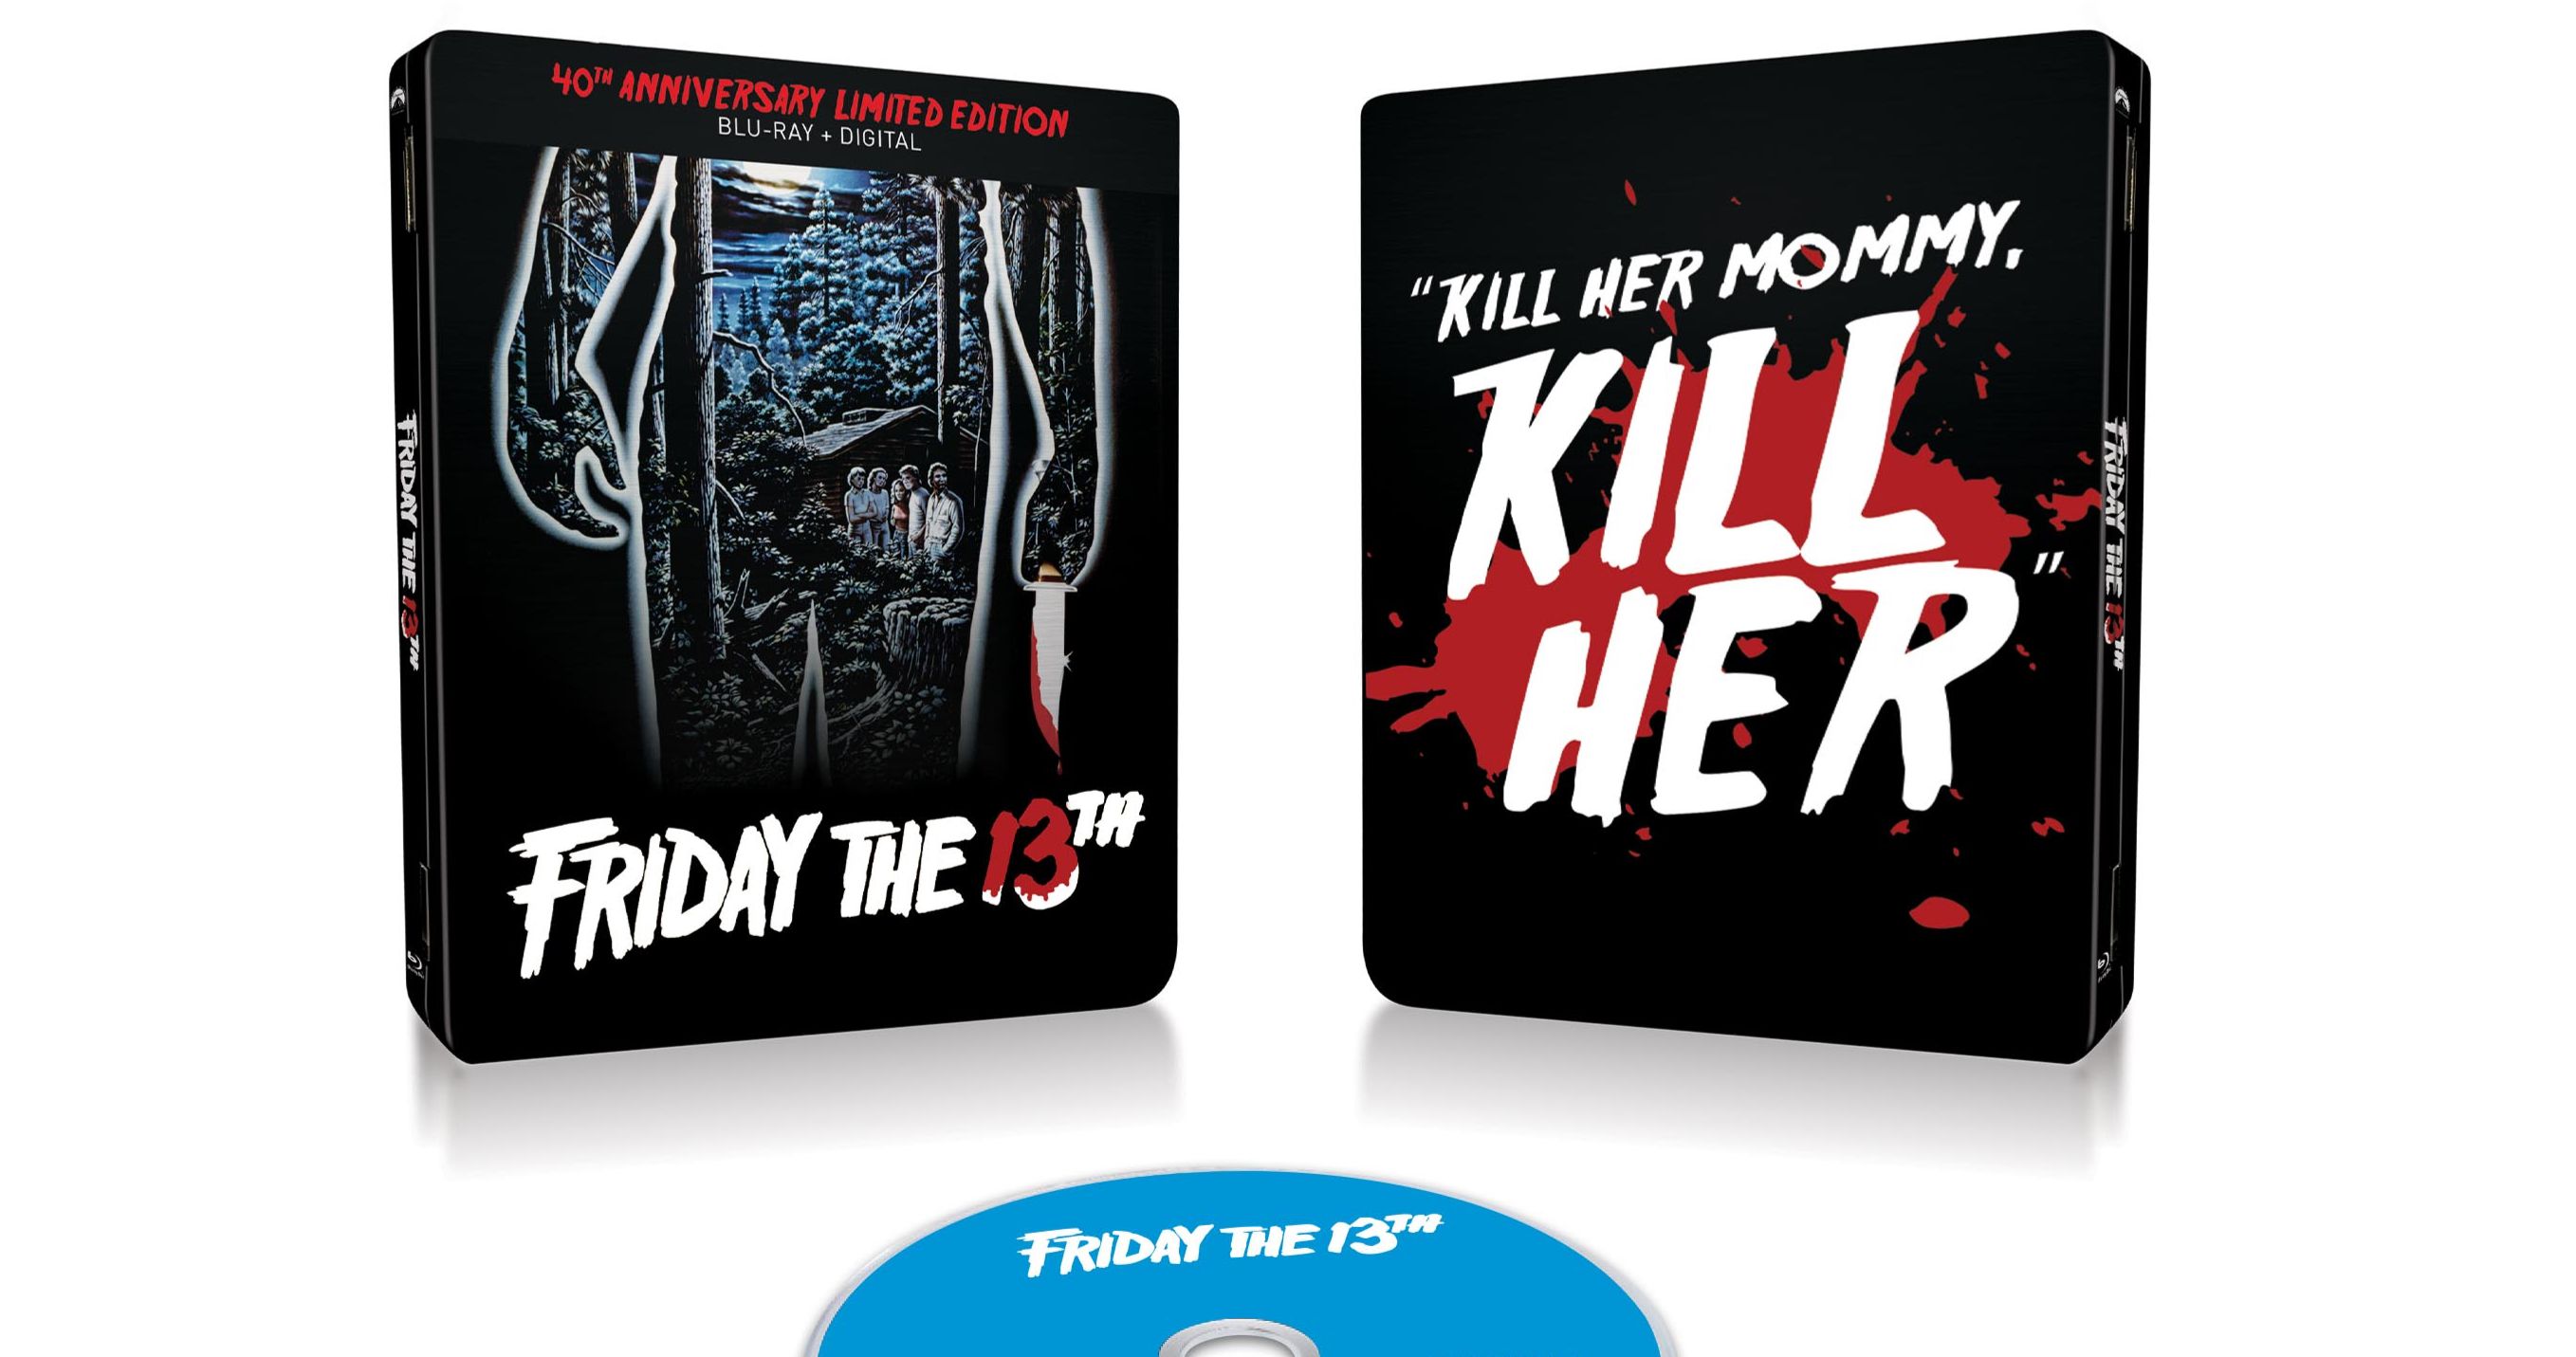 Friday the 13th Gets a Killer 40th Anniversary Steelbook Blu-ray This May